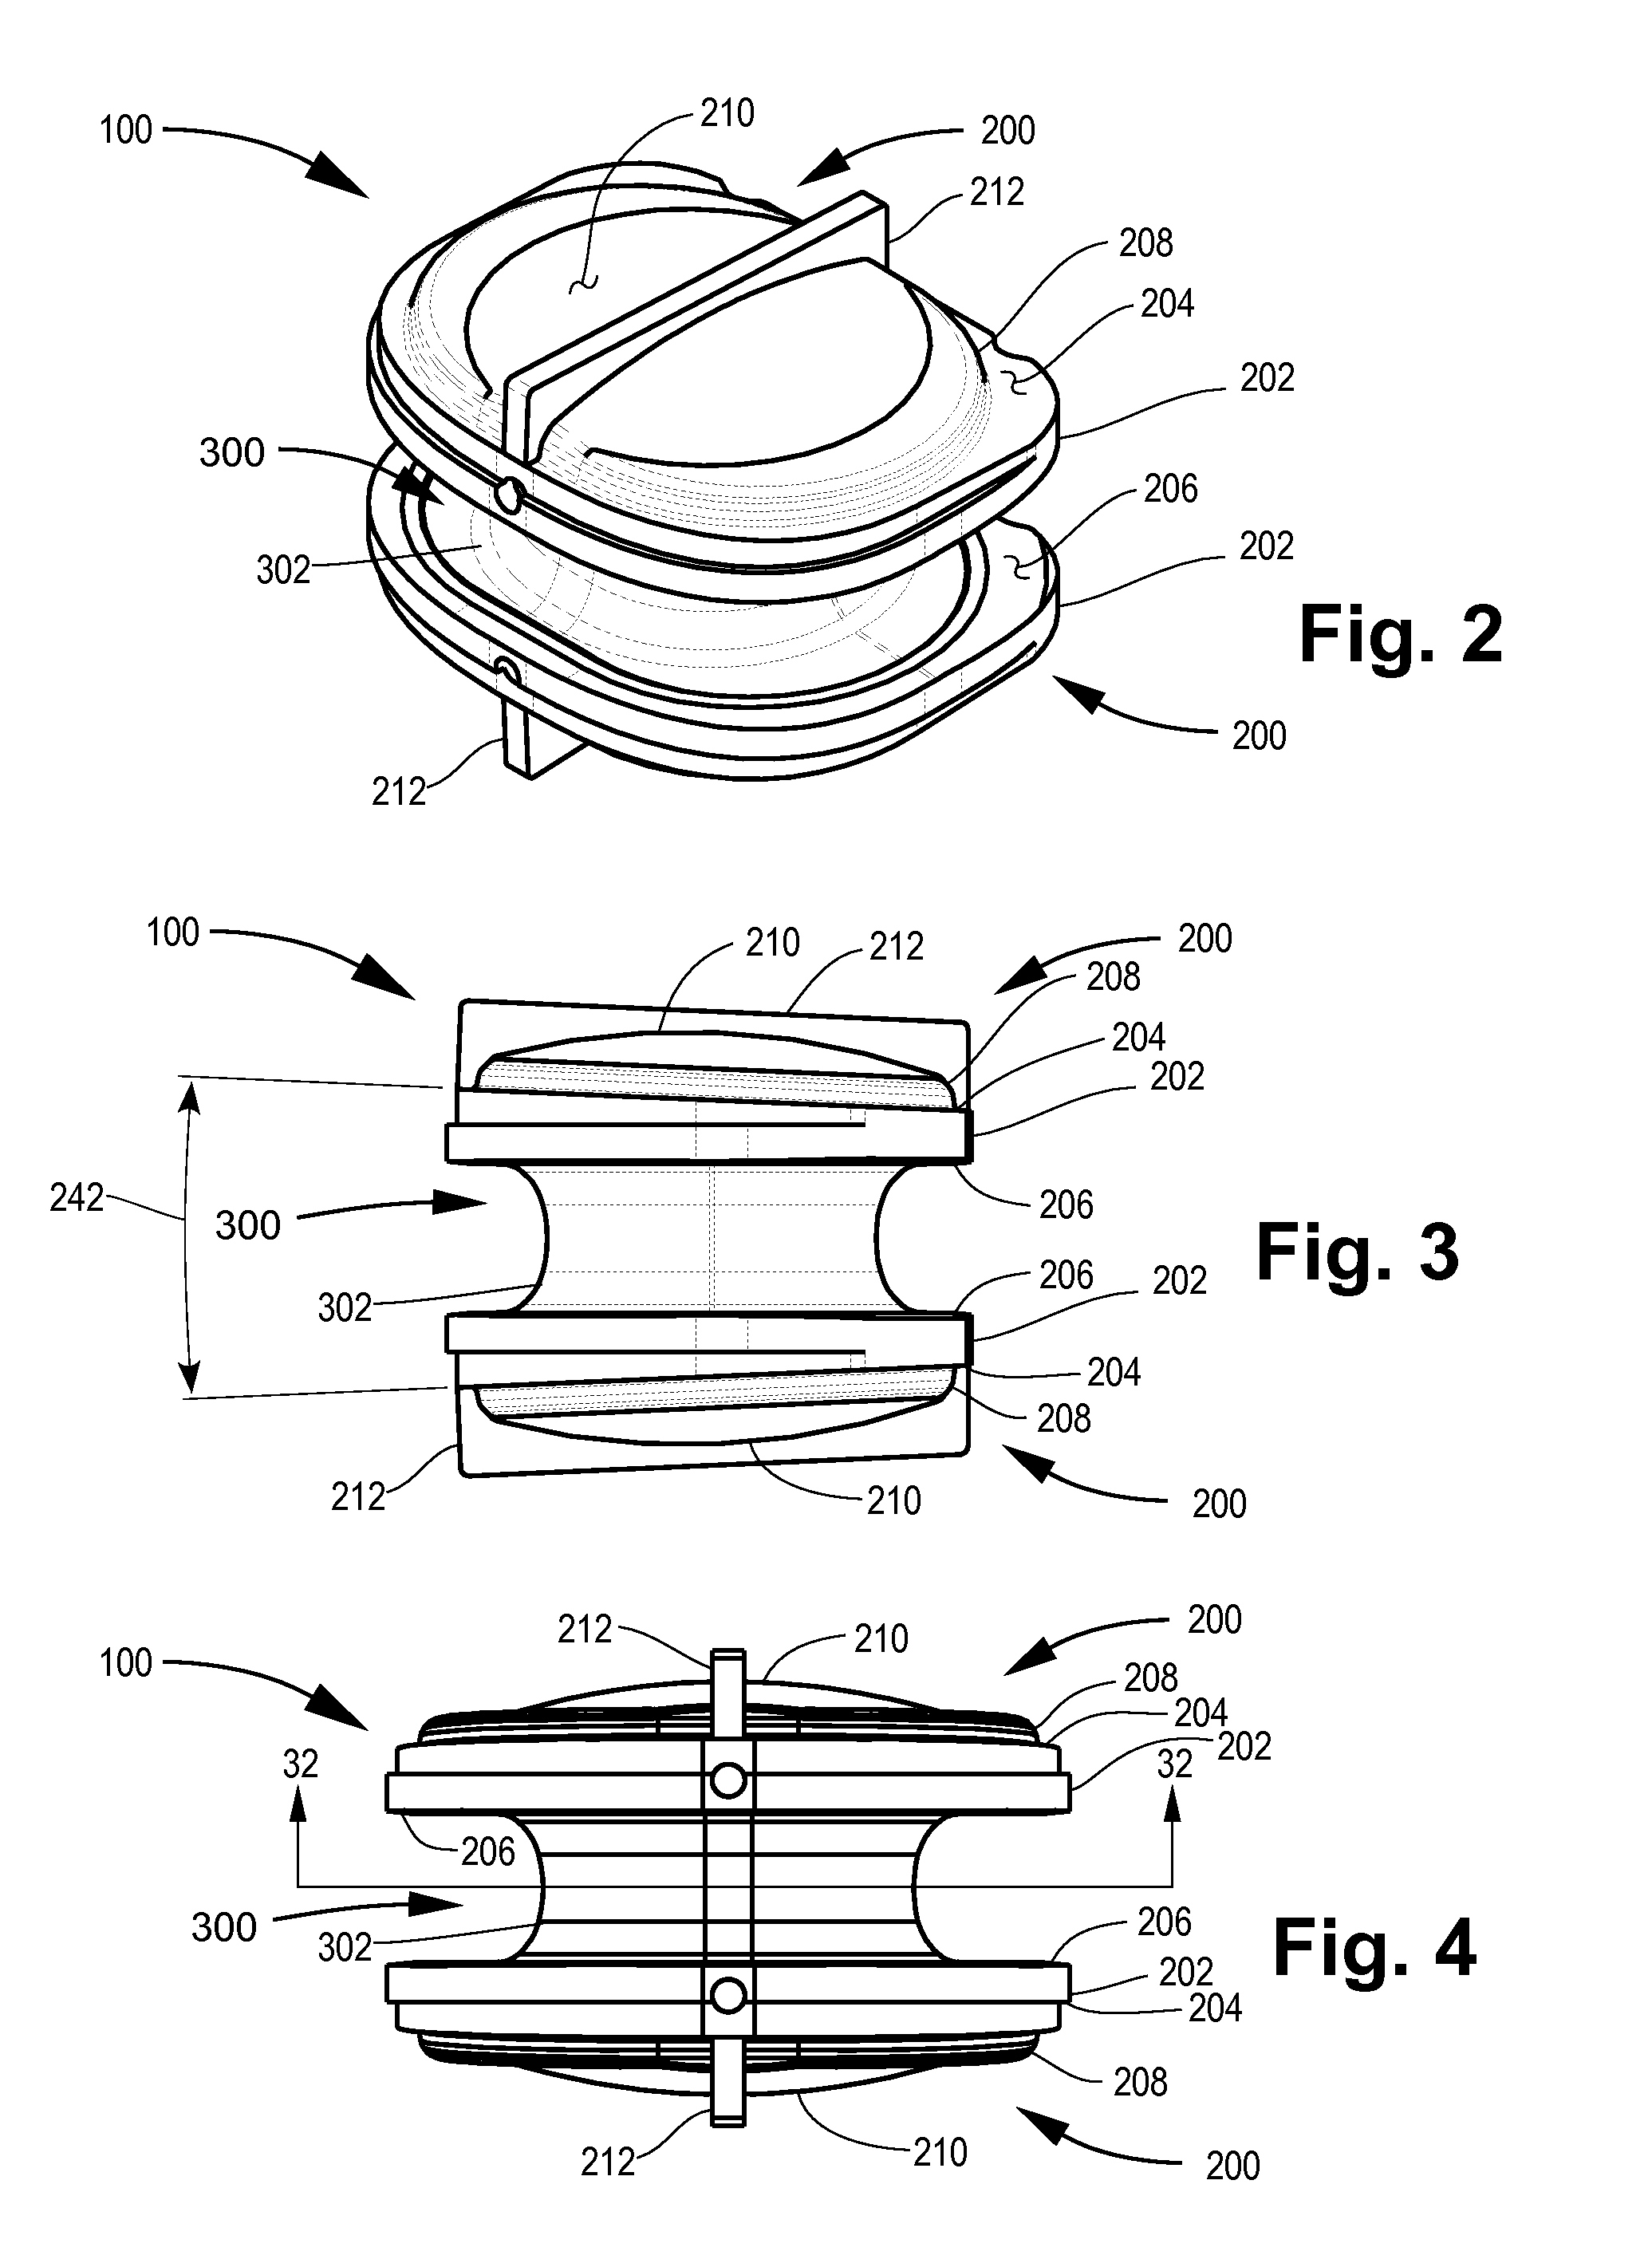 Orthopedic device assembly with elements coupled by a retaining structure